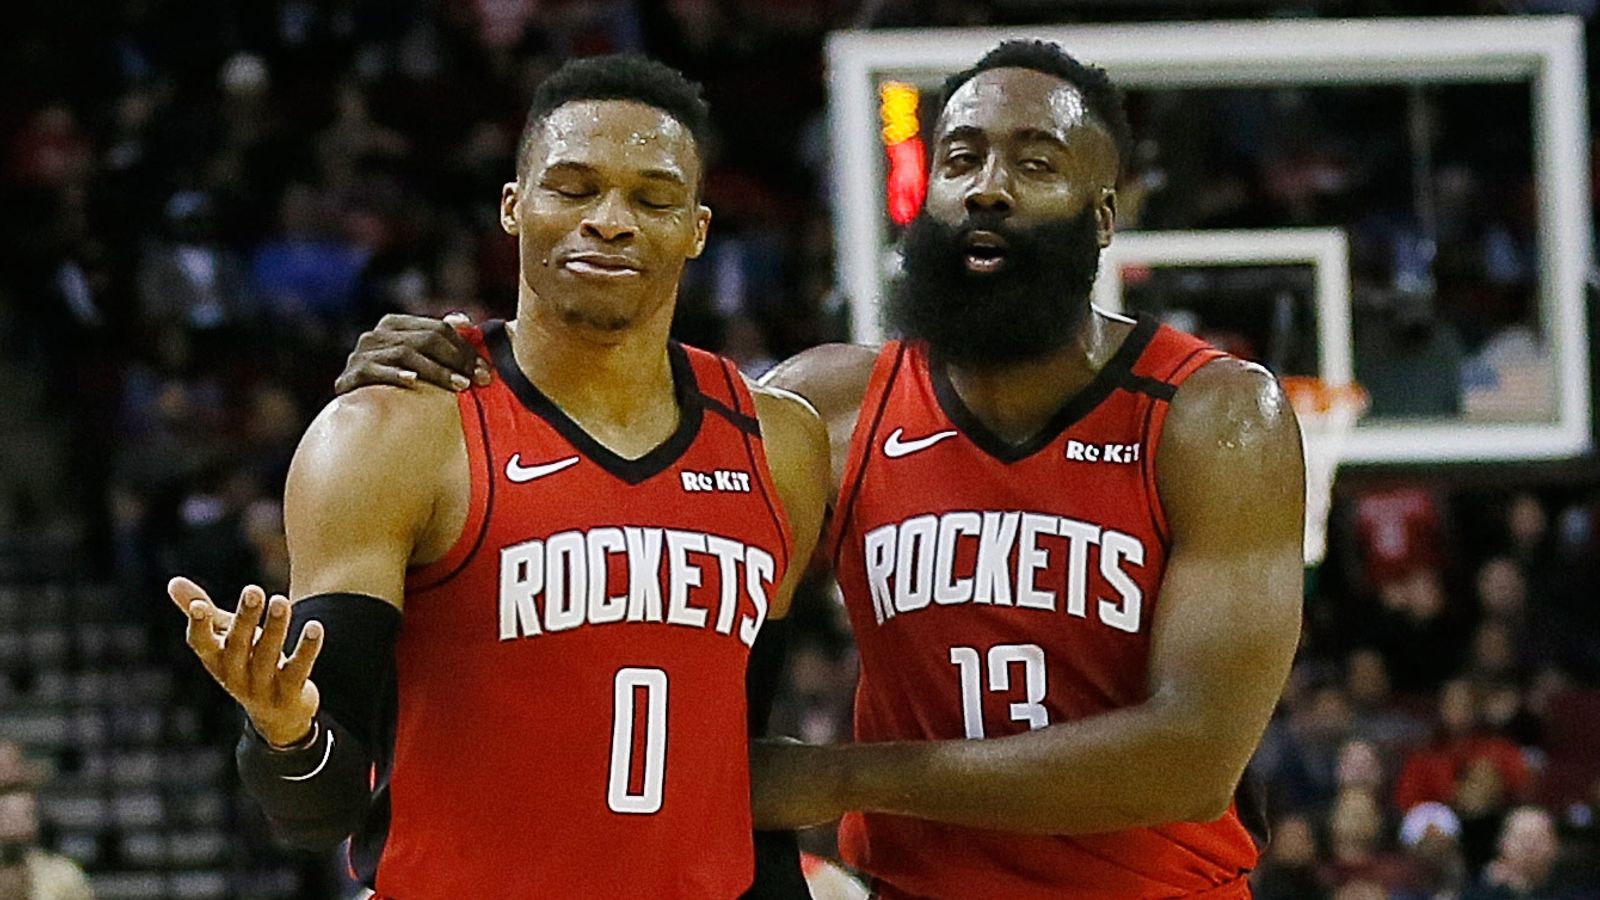 Houston Rockets’ Future Stars Shine, Top 3 Young Players Ranked by The Ringer